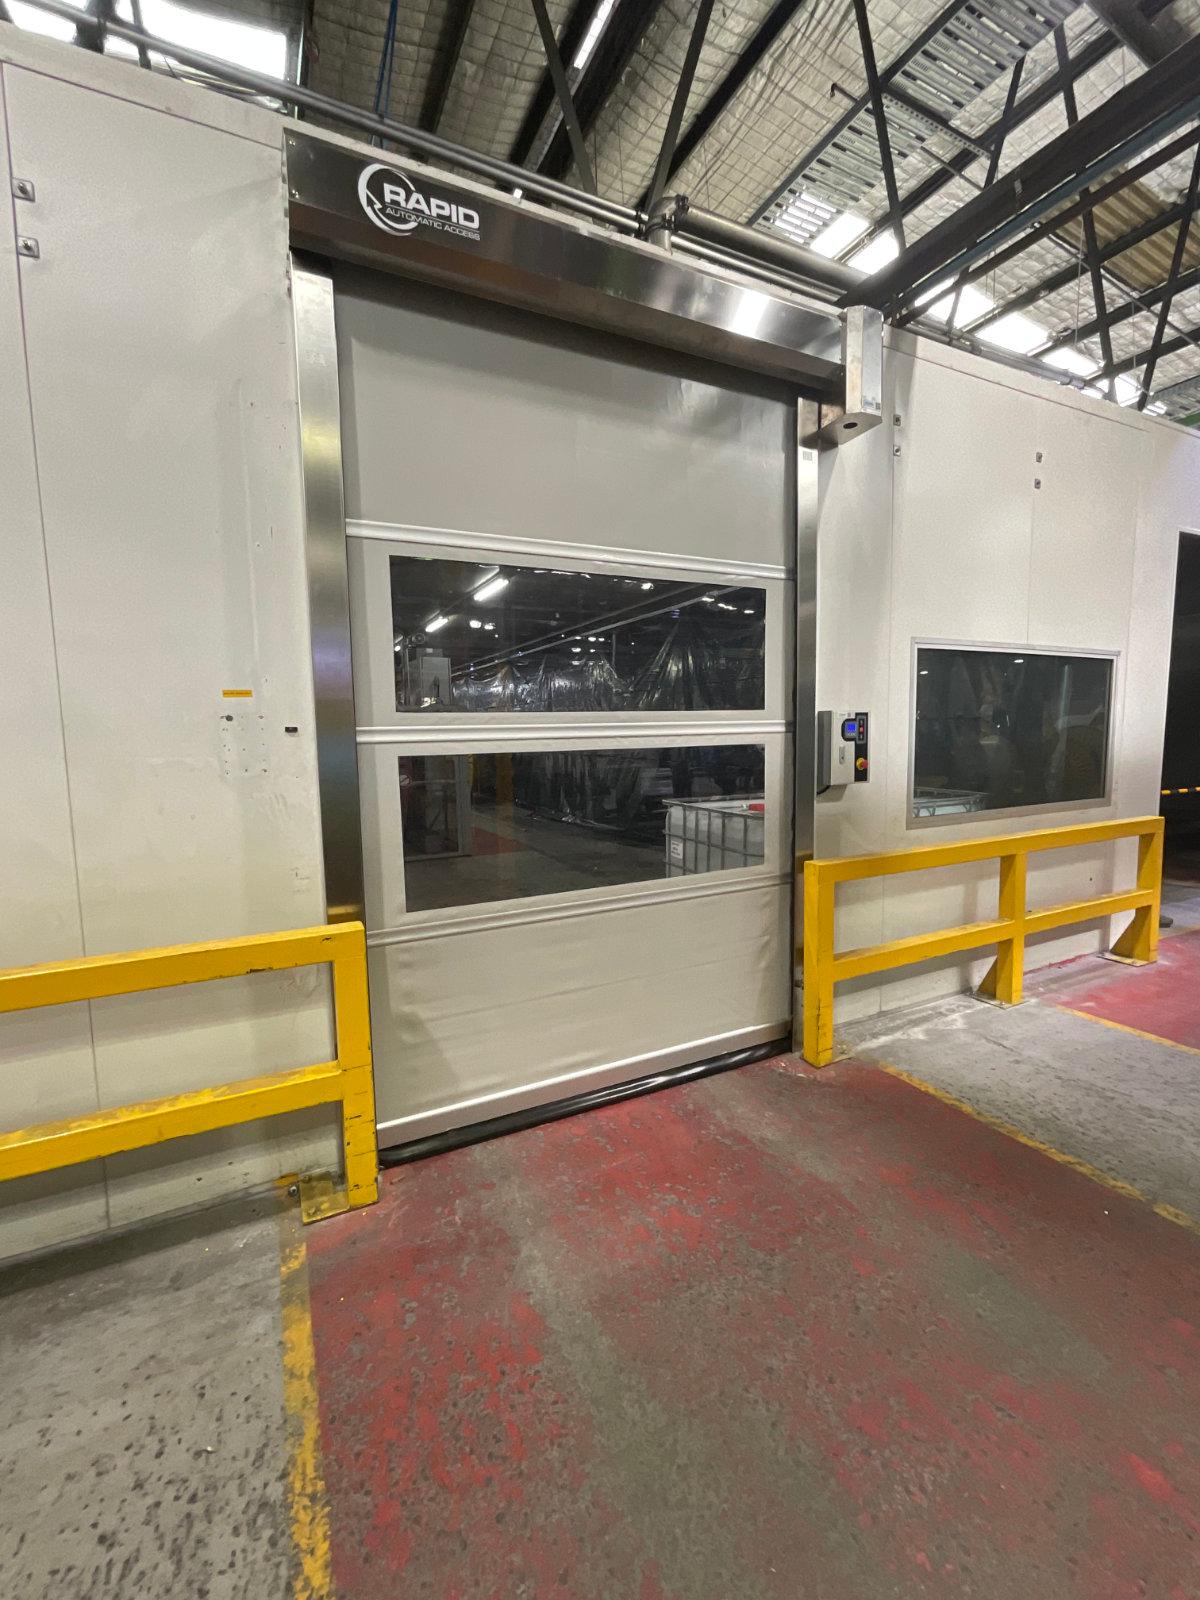 High-speed door at cables depot.